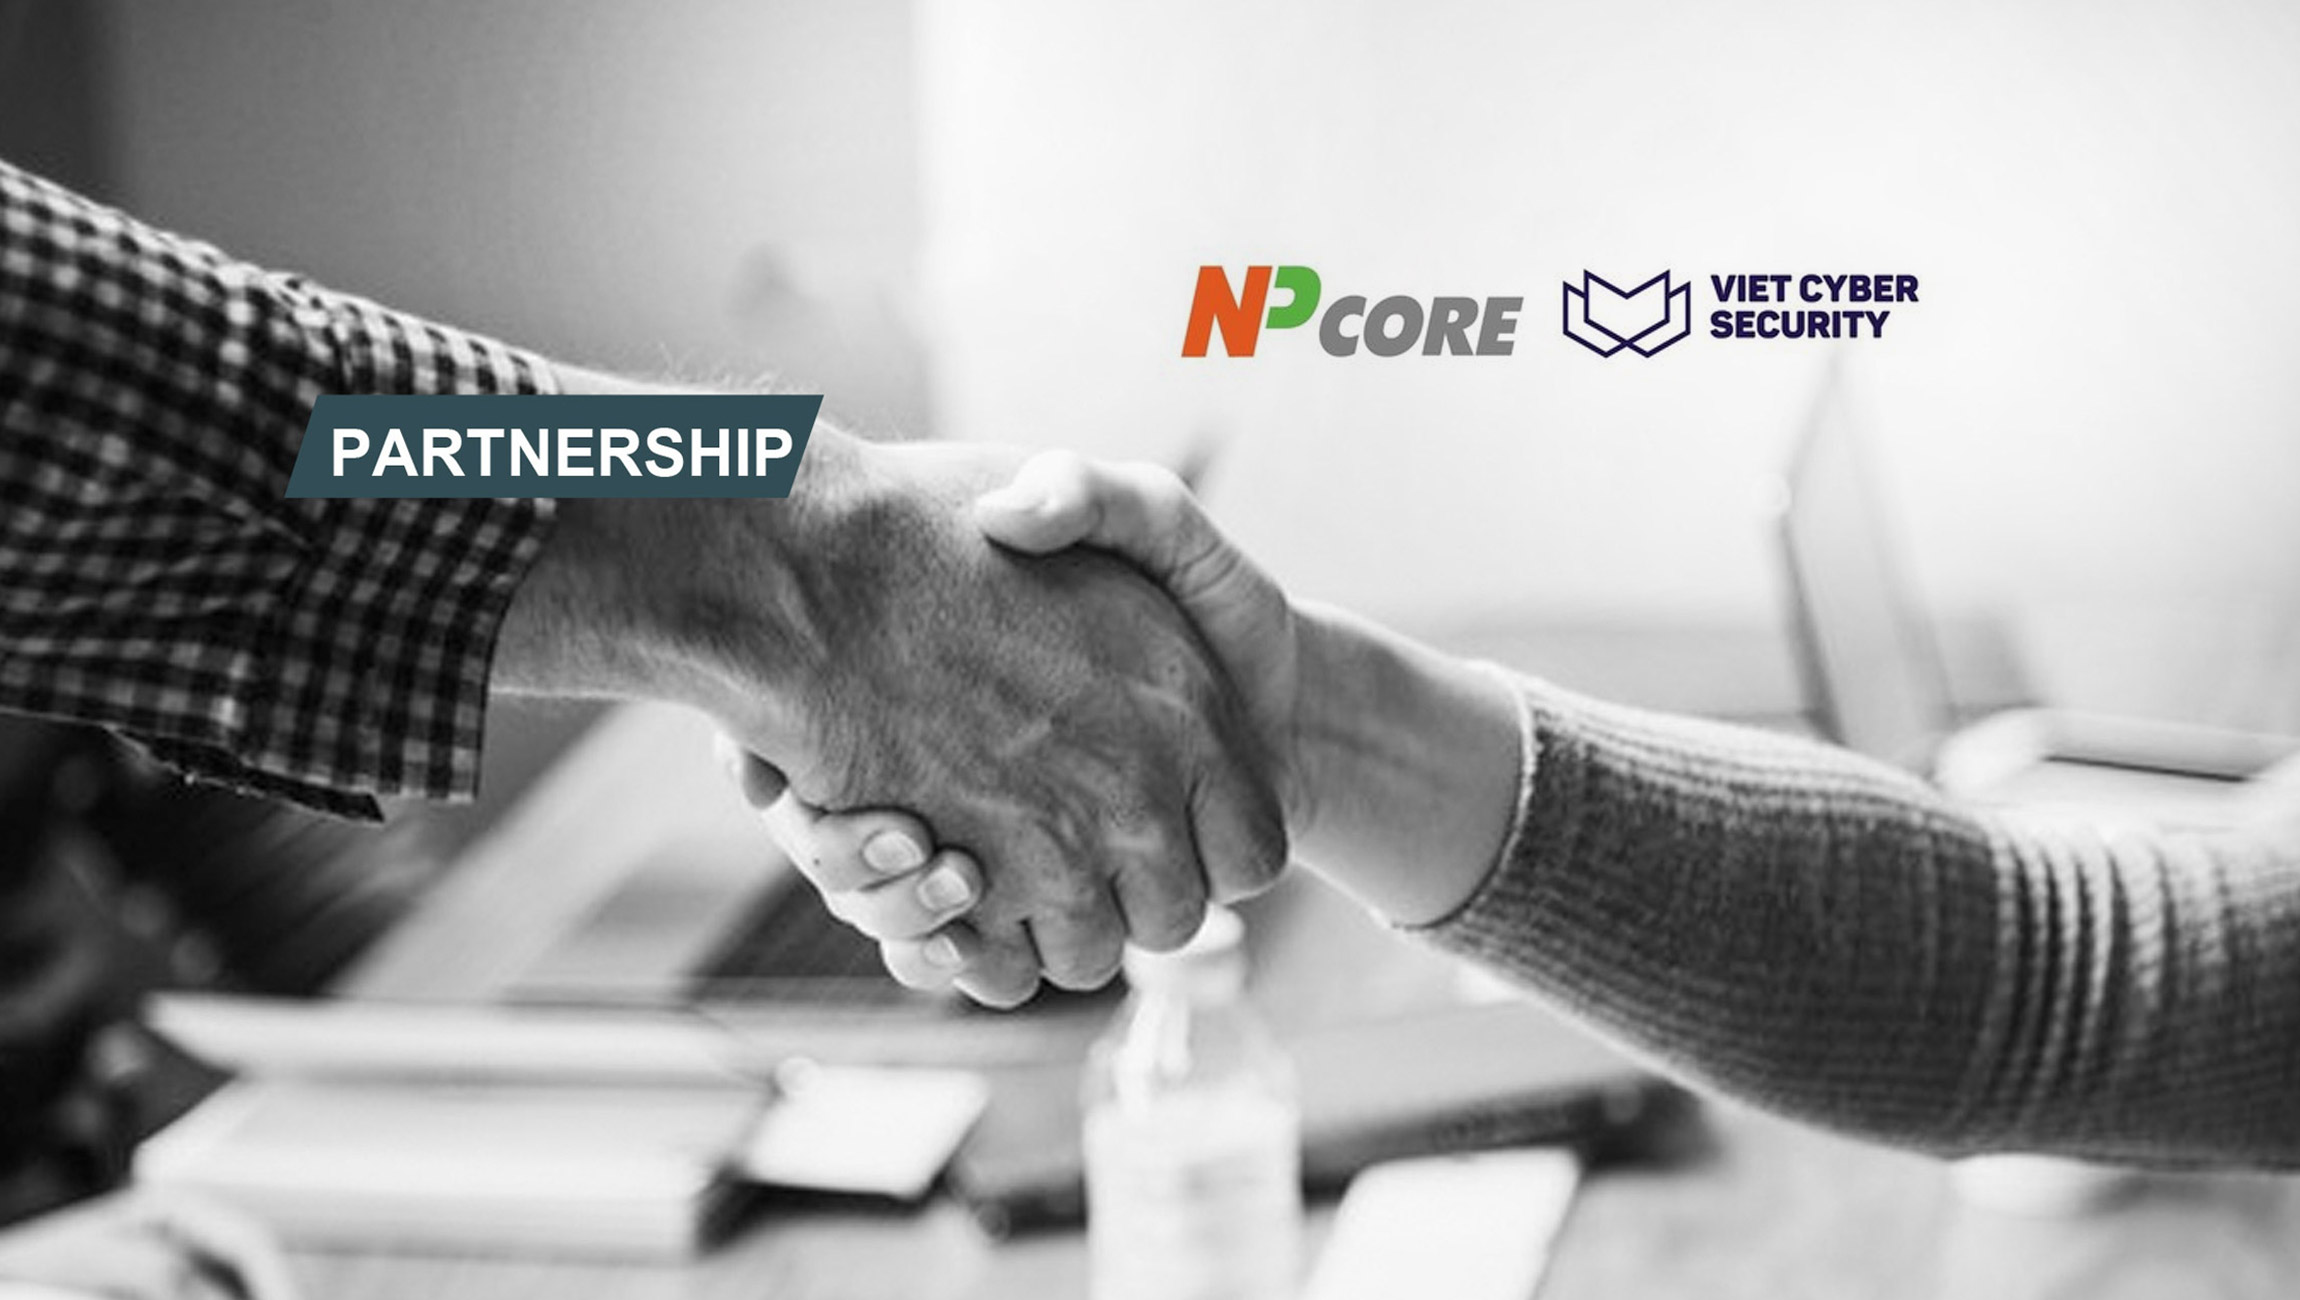 NPCoreNPCore Forms Global Partnership With Viet Cyber Security Towards Expansion Into SE Asian It Security Market Forms Global Partnership With Viet Cyber Security Towards Expansion Into SE Asian It Security Market